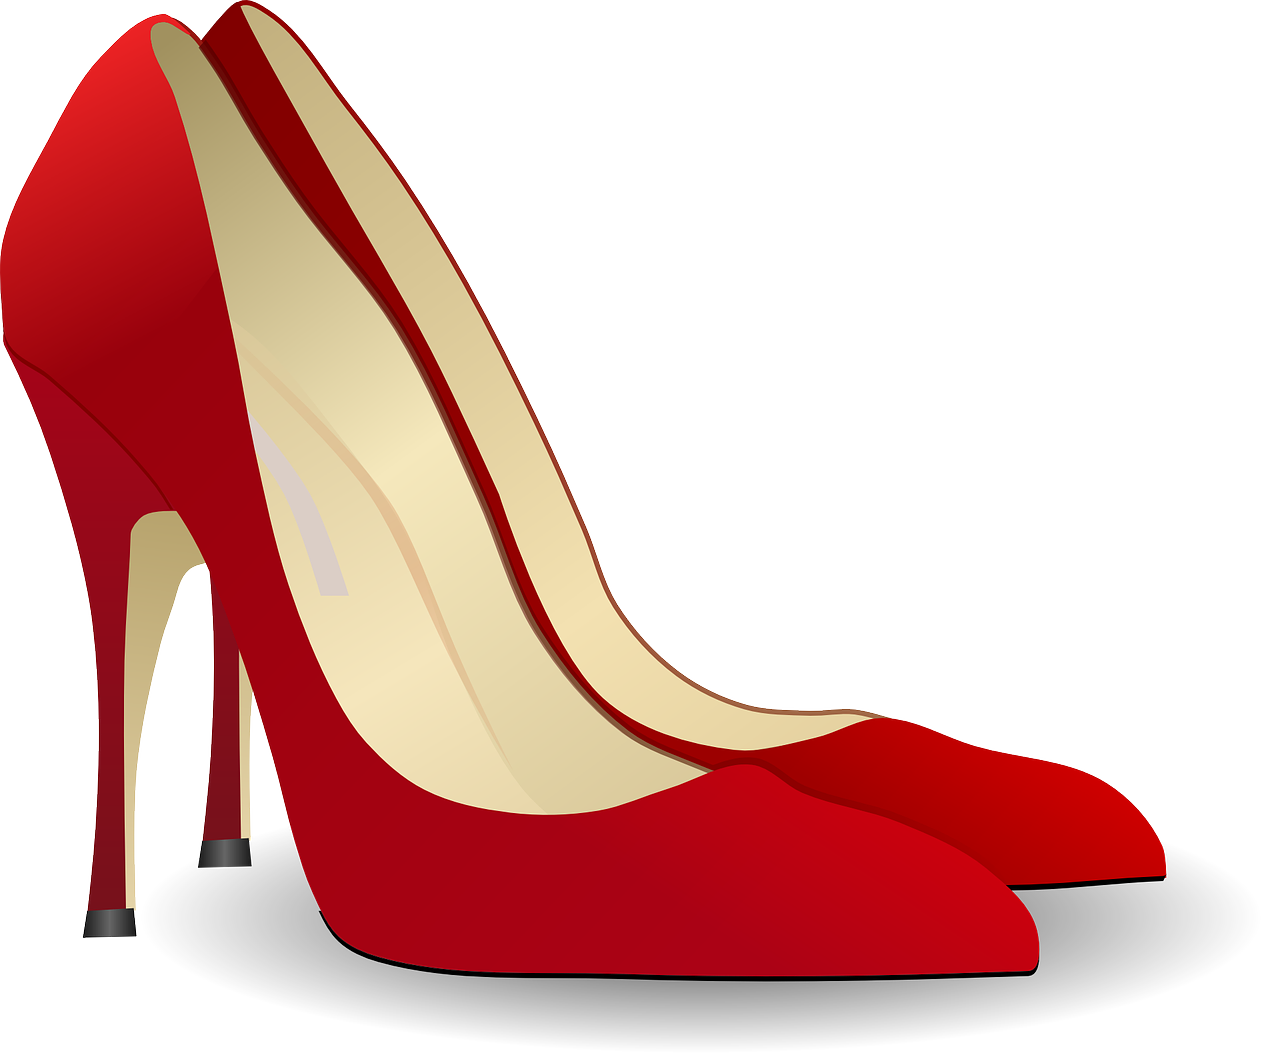 Heels banned in church for preventing Adventists from walking softly in the sanctuary